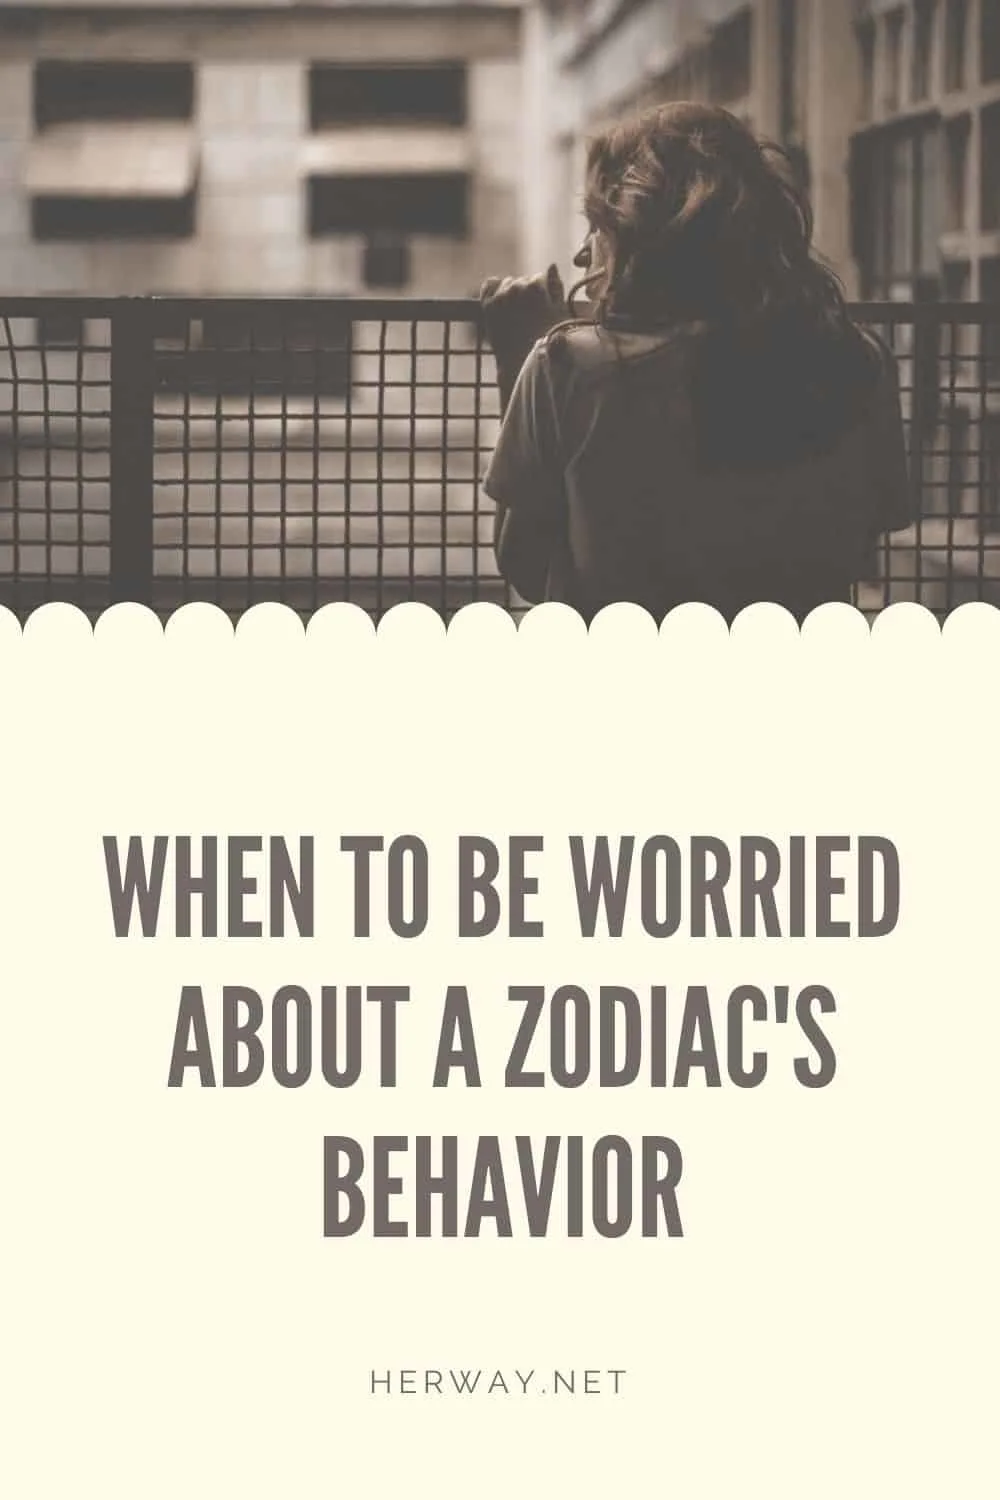 When To Be WORRIED About A Zodiac's Behavior